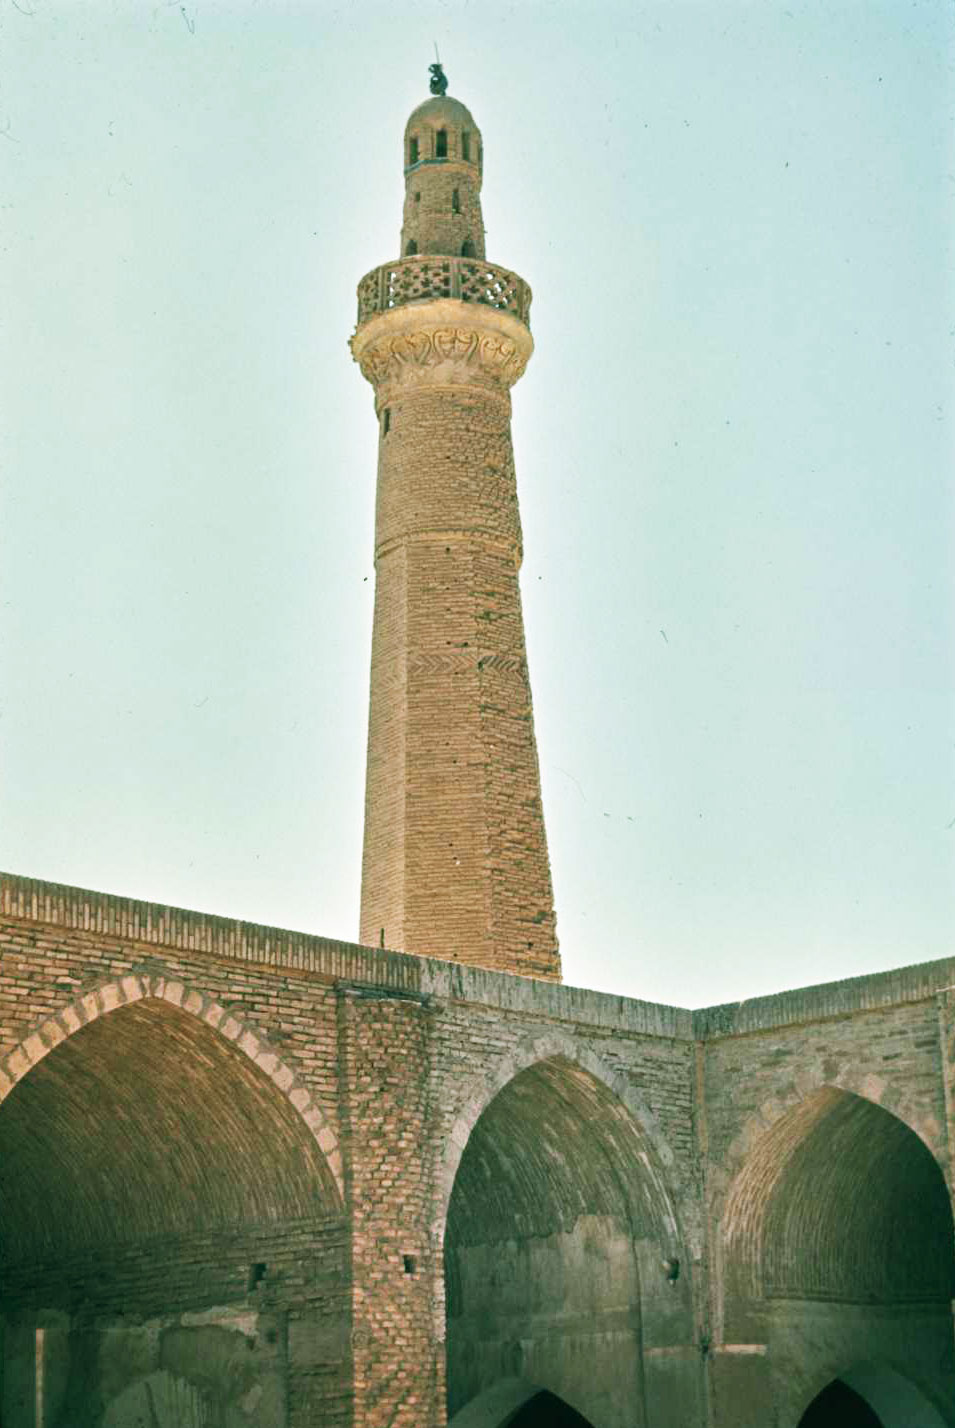 Detail view of the minaret